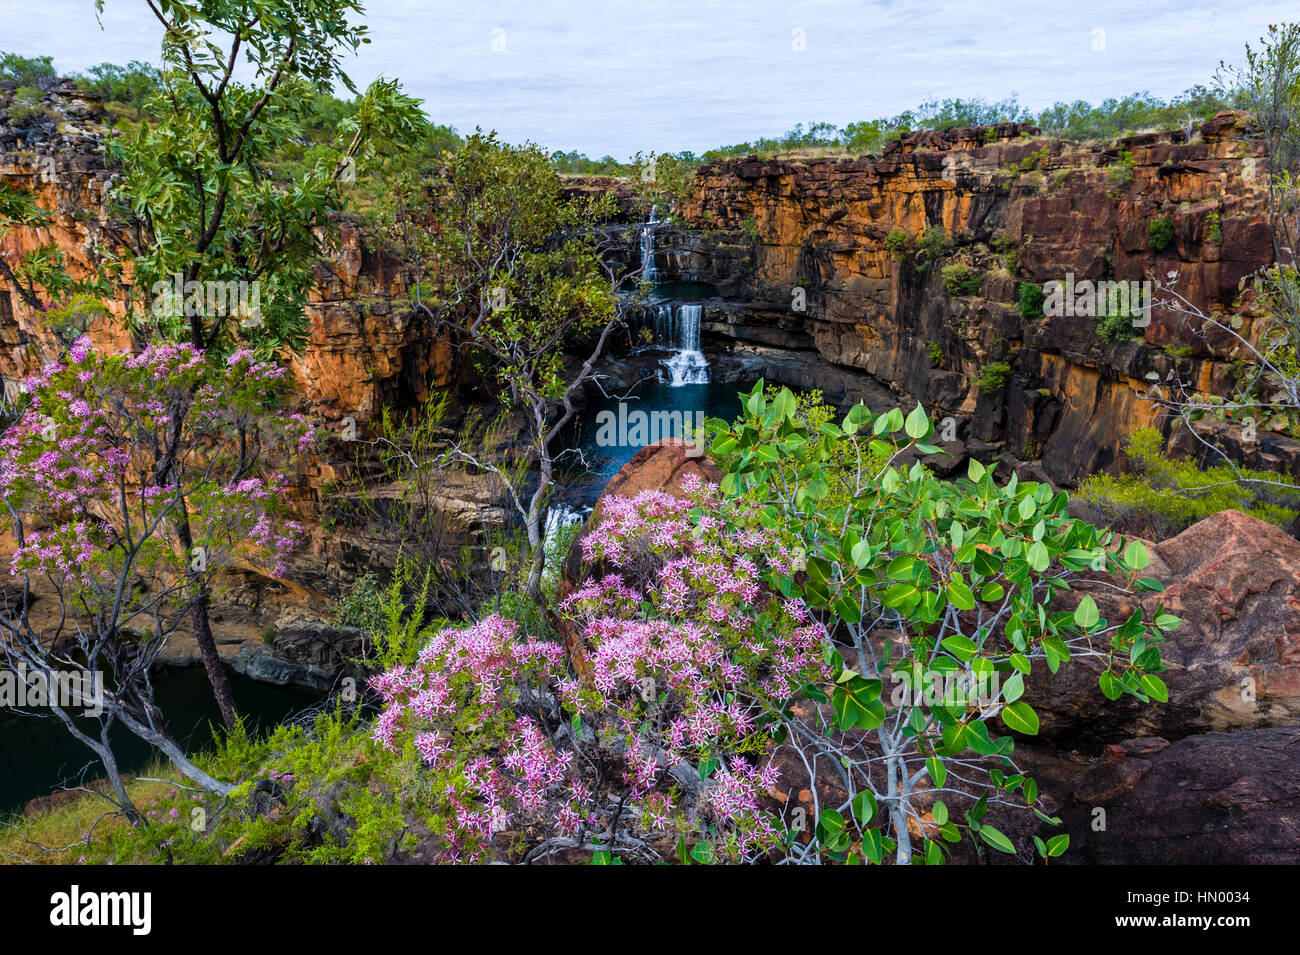 The Mitchell River cascades down sandstone tiers in waterfalls behind Turkey Bush flowers. Stock Photo